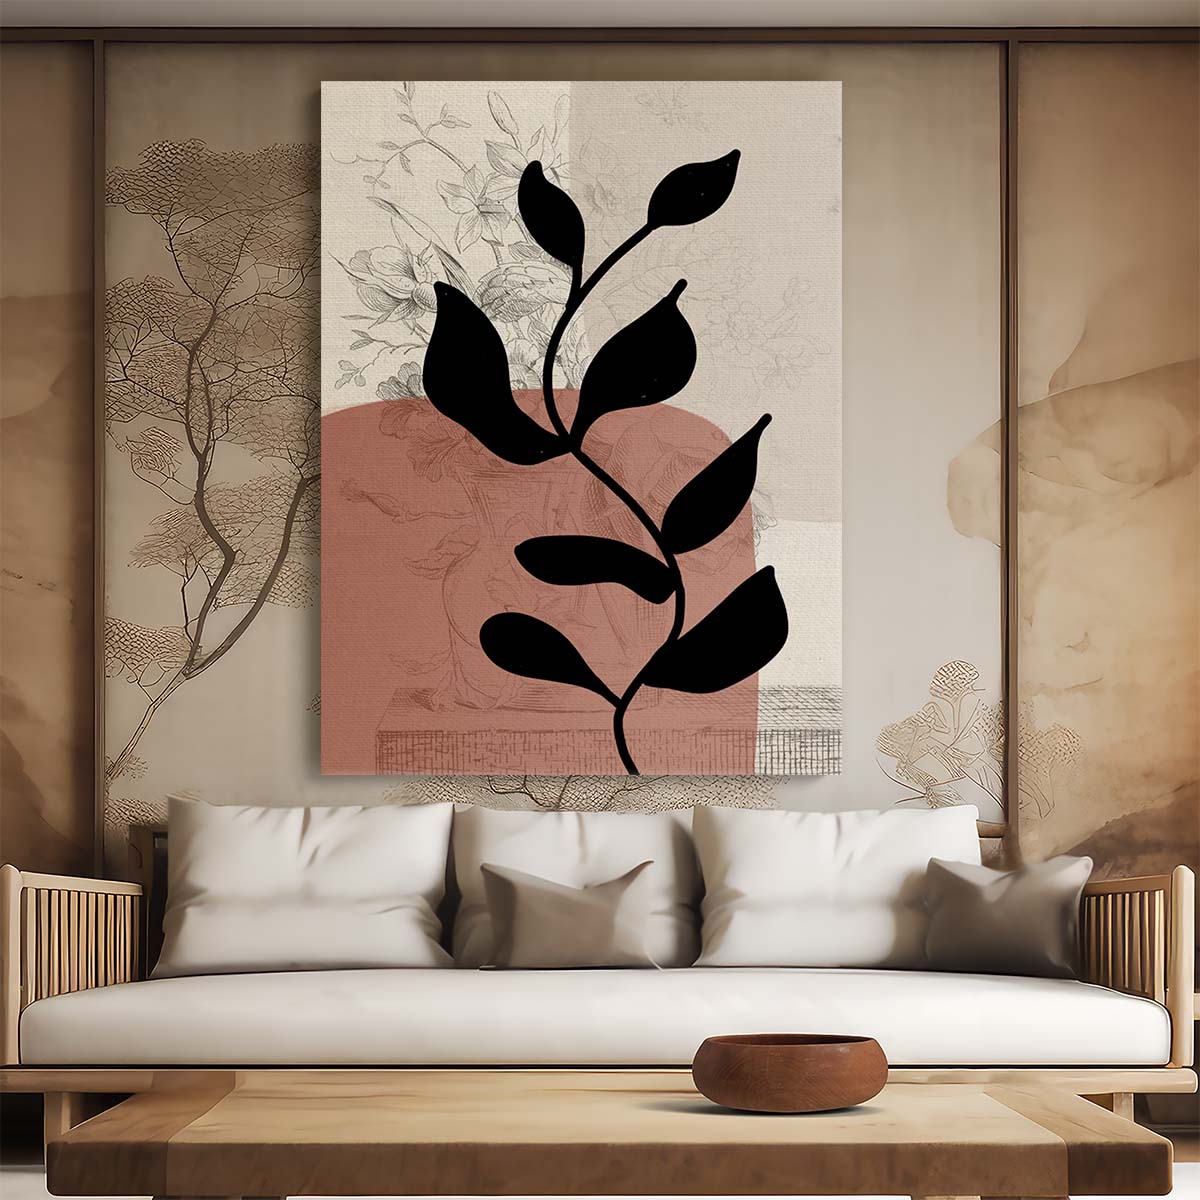 Vintage Botanical Illustration Wall Art in Terracotta, Yopie Studio by Luxuriance Designs, made in USA